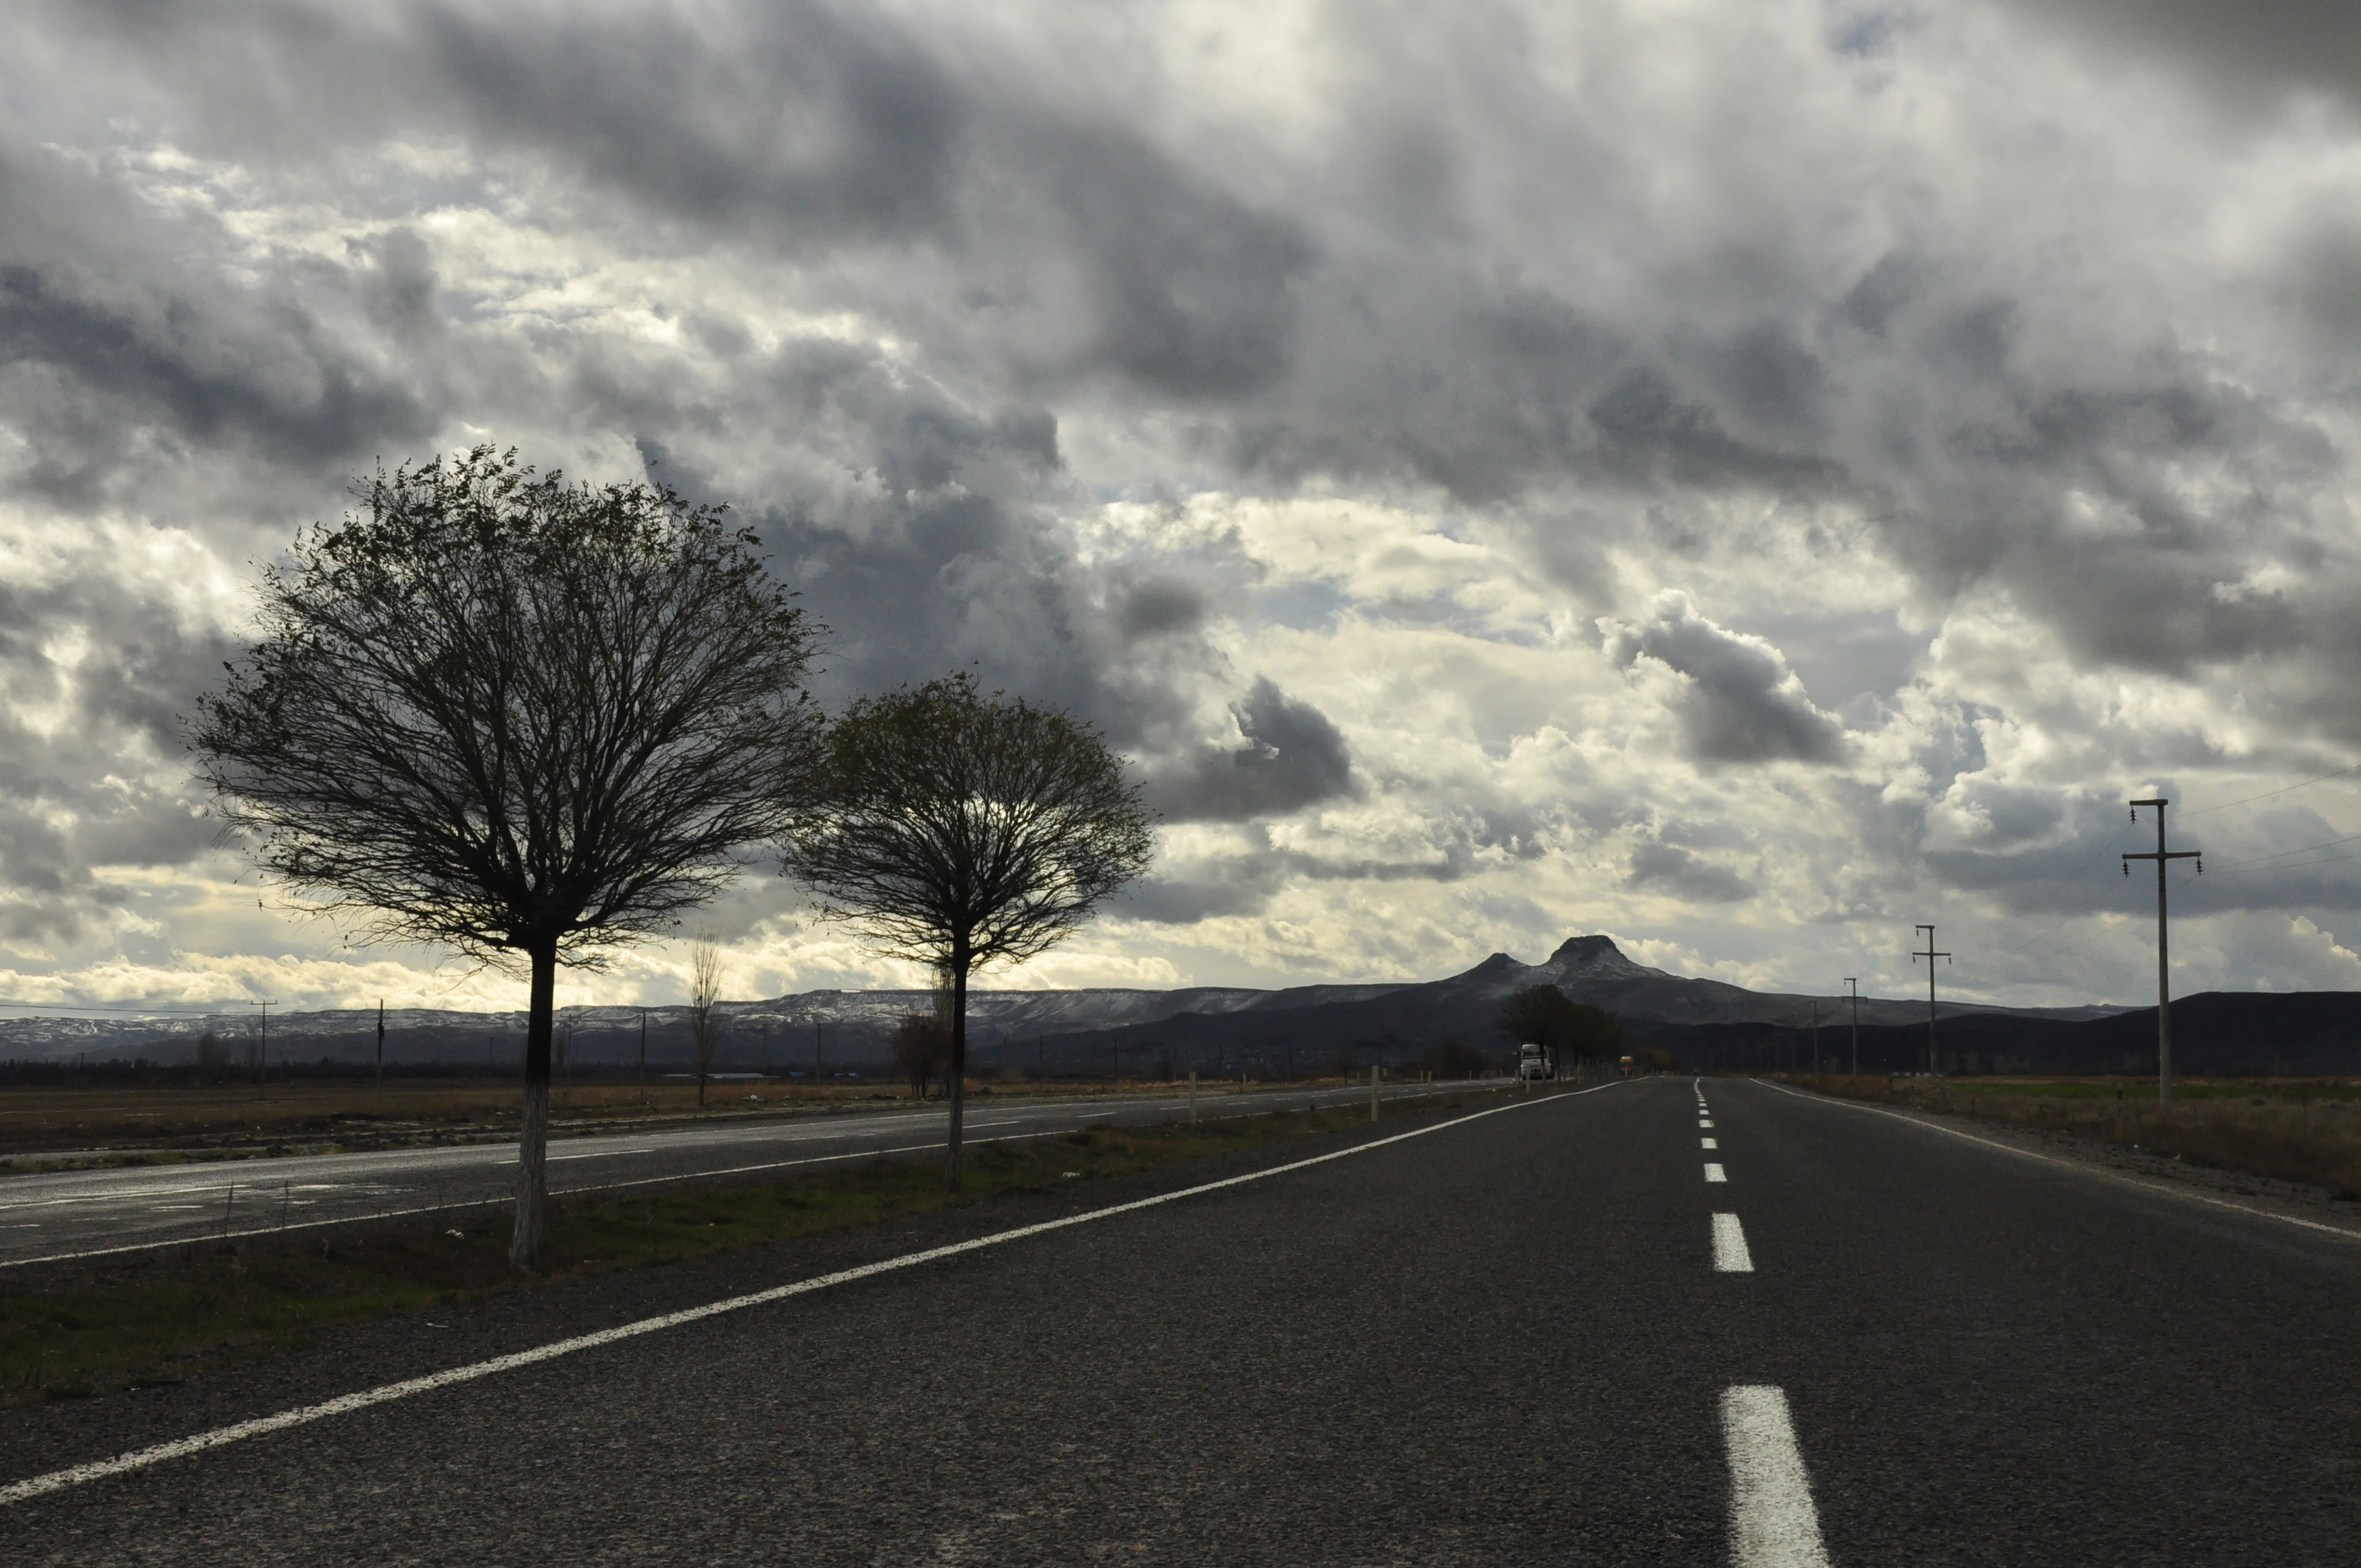 Gray Cloudy Sky: A slopping road, Grim weather, Darkening skies. 3220x2140 HD Background.